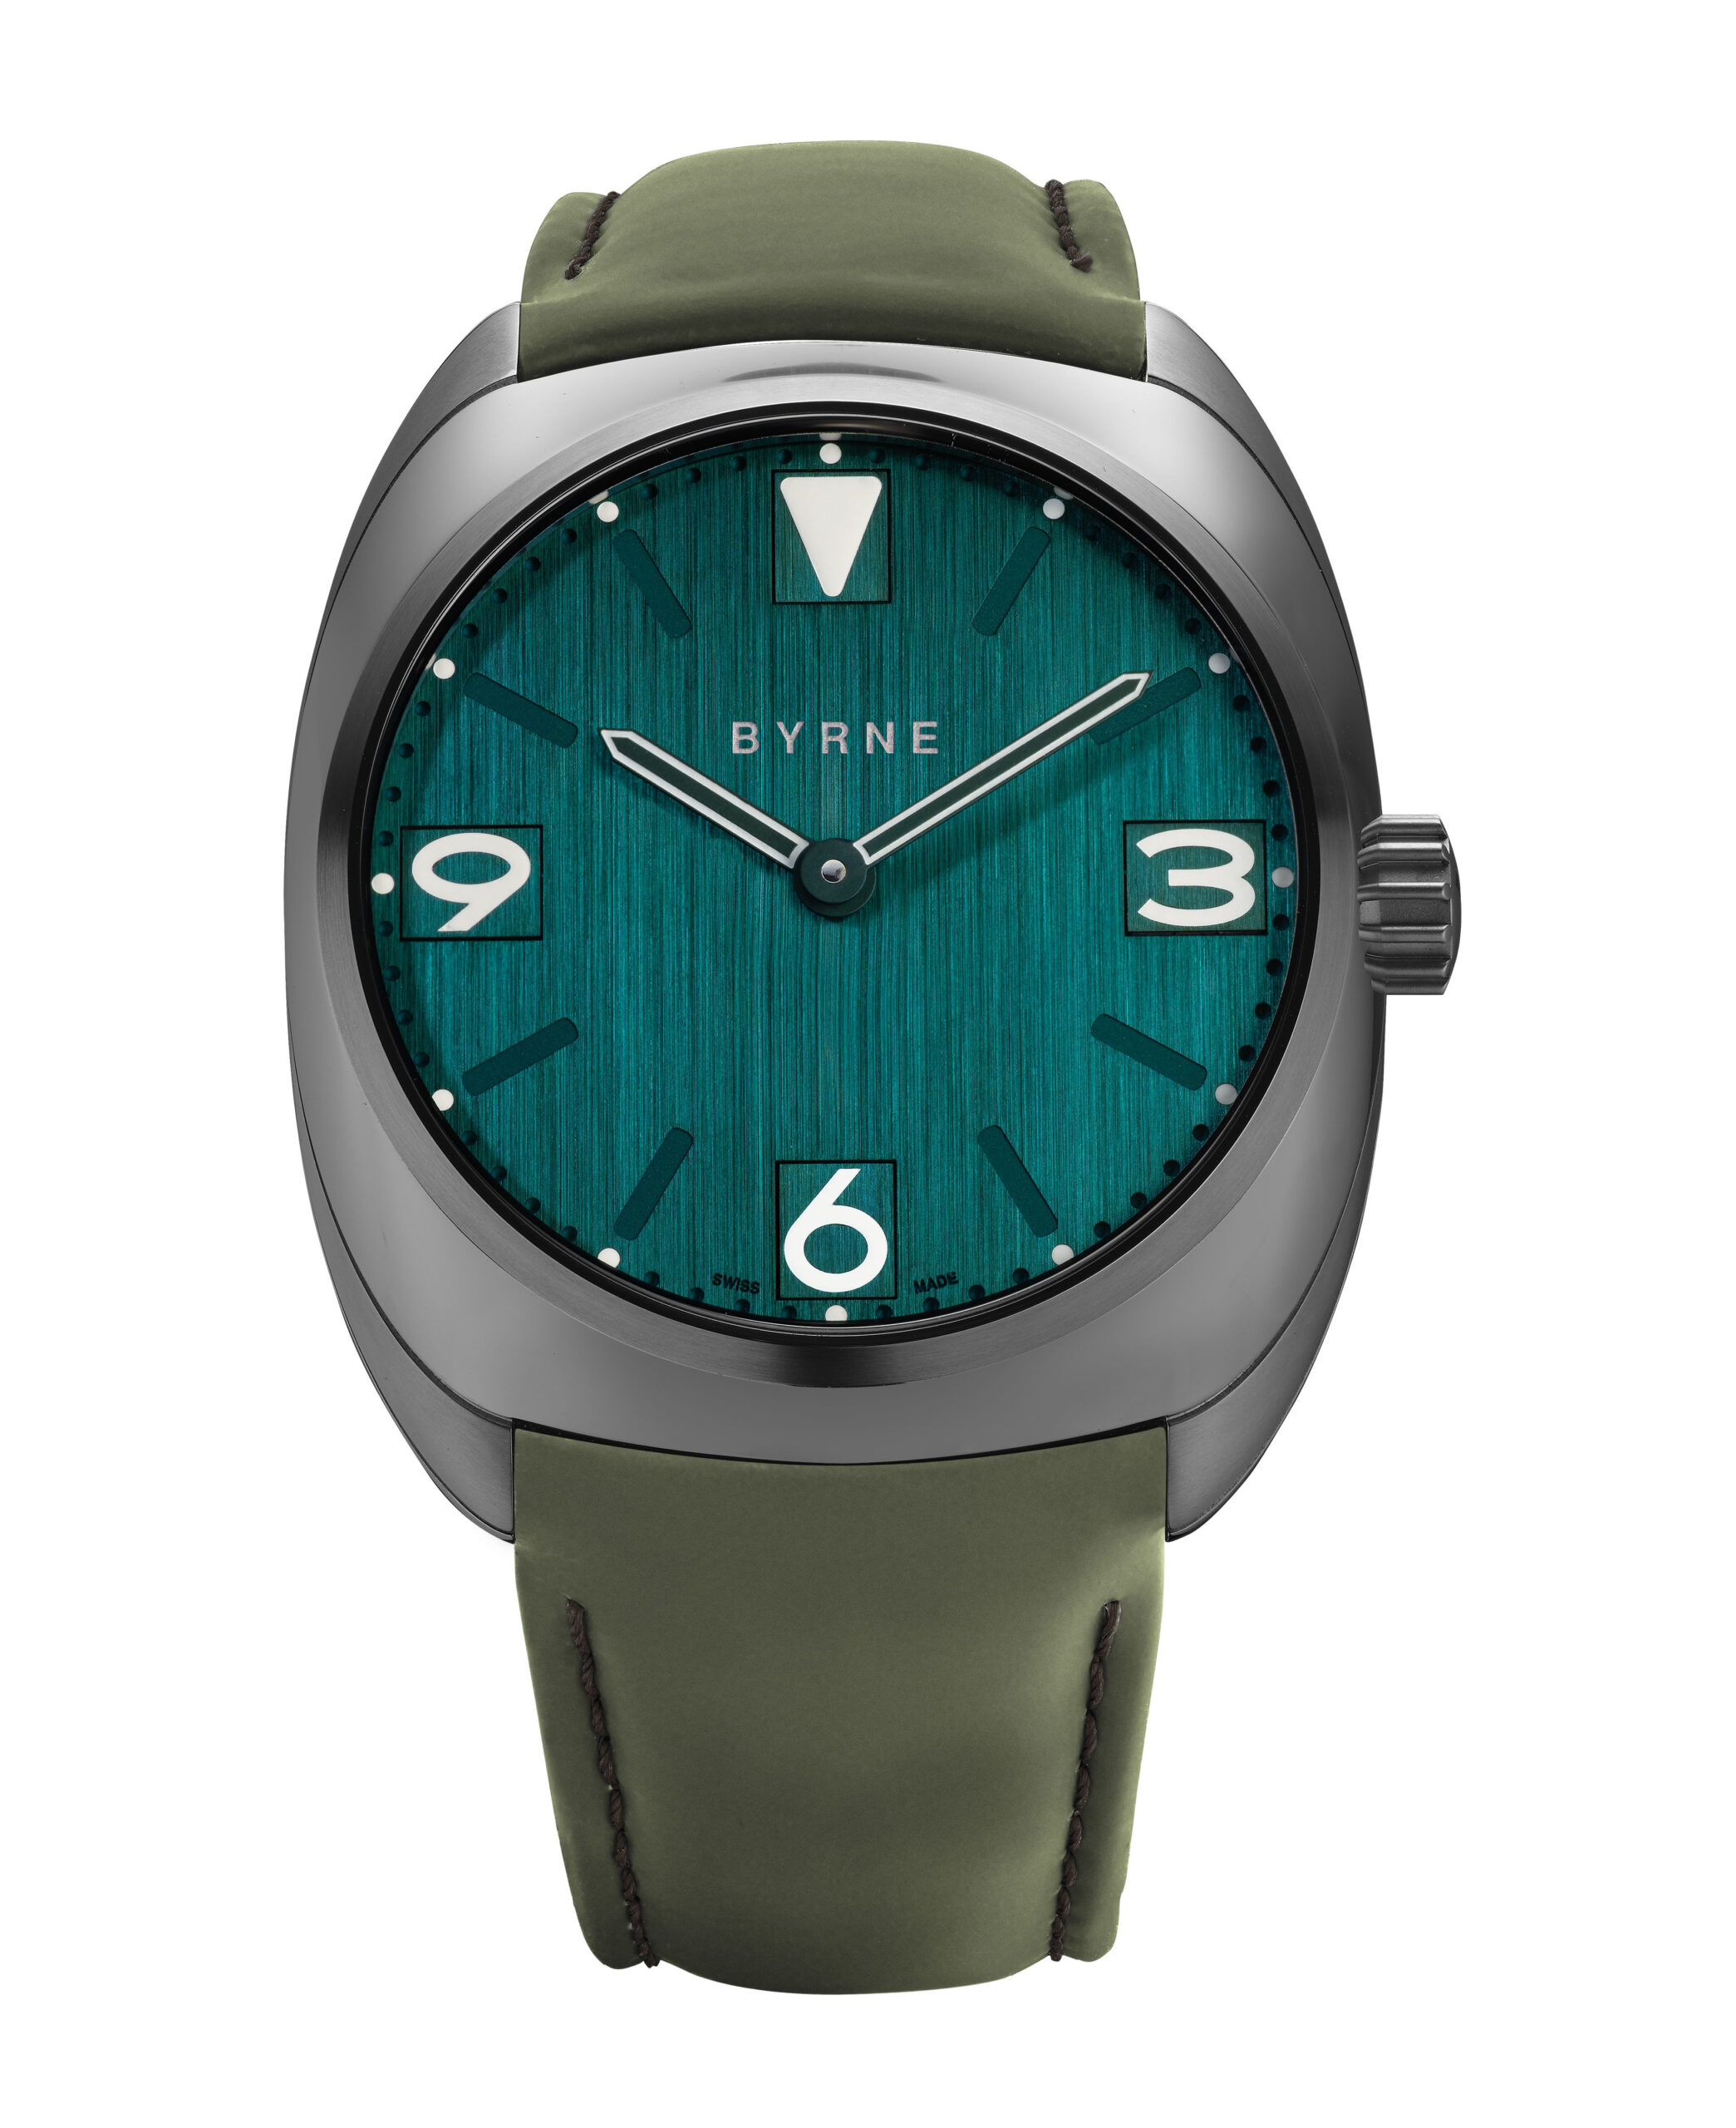 Byrne Petroleum Green GyroDial 311 Watch Review